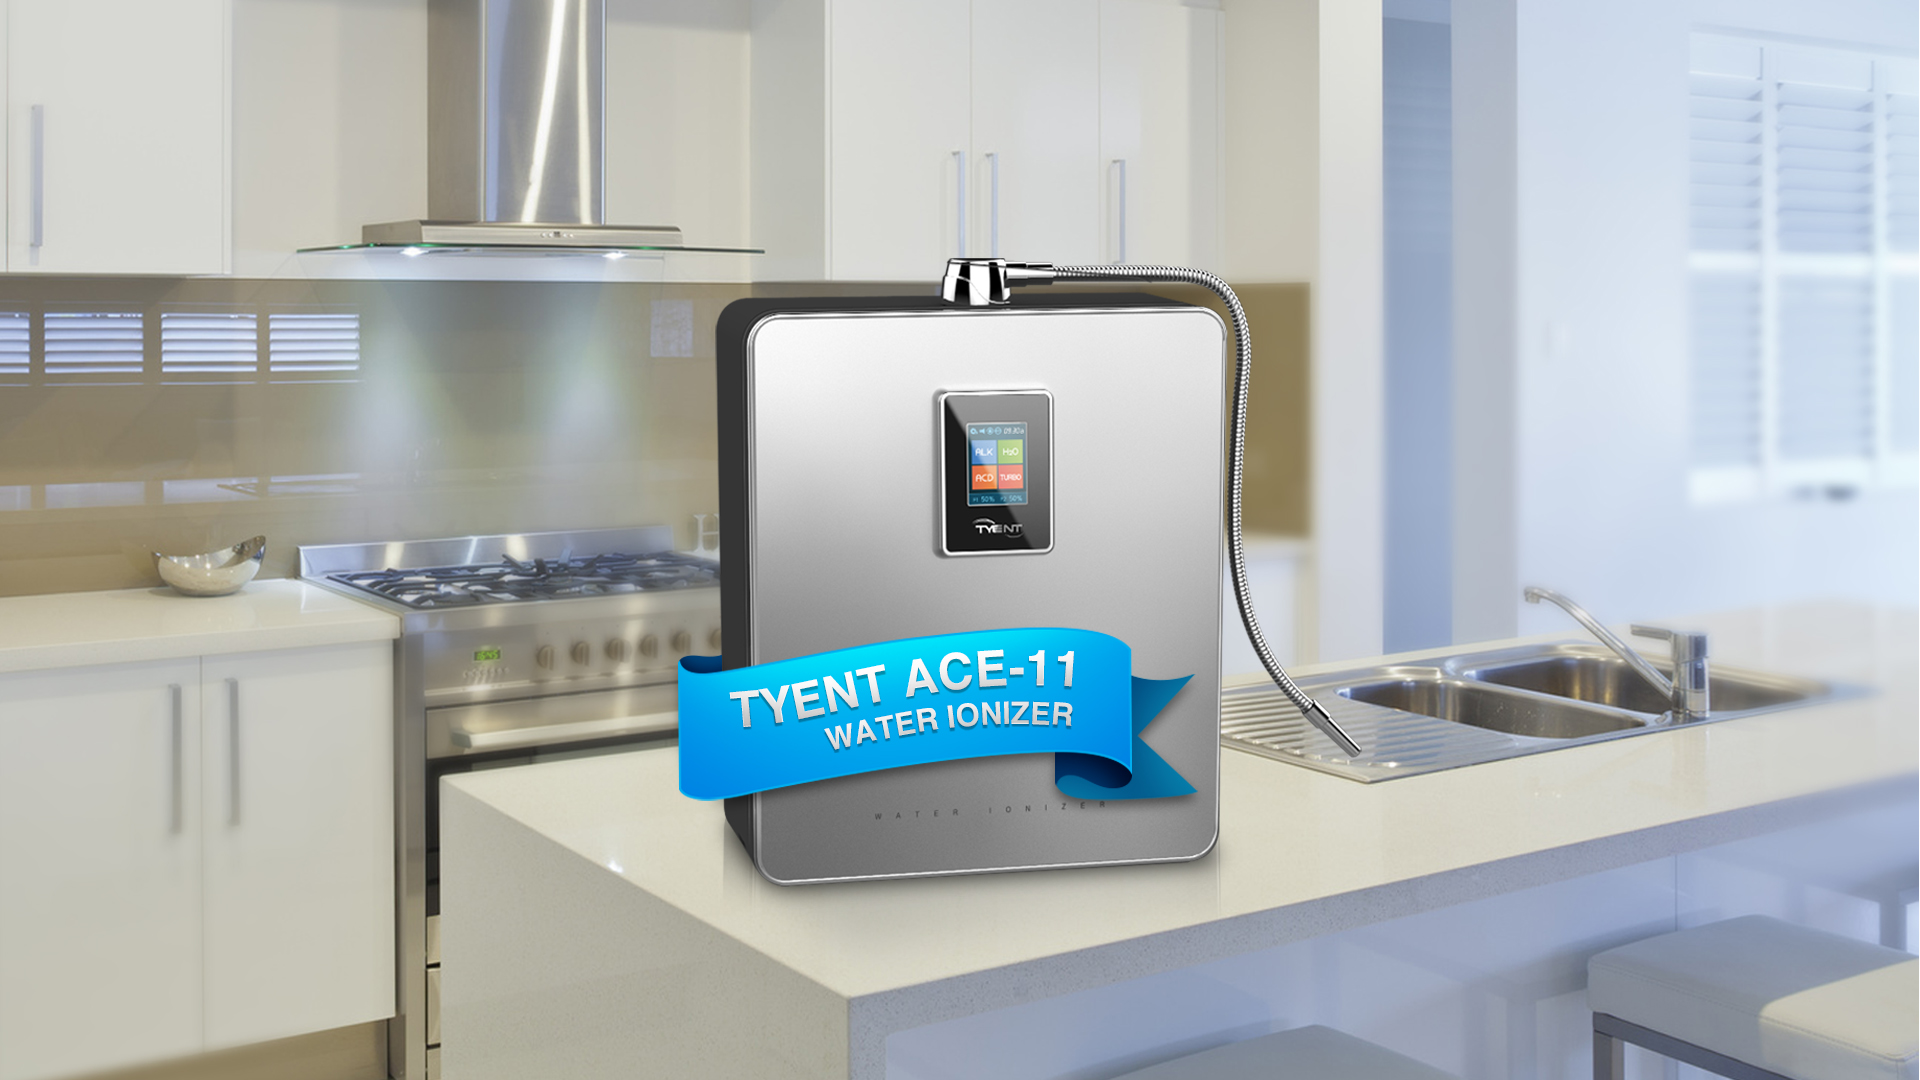 Tyent's new Ace-11 water ionizer is the hottest product in alkaline water.